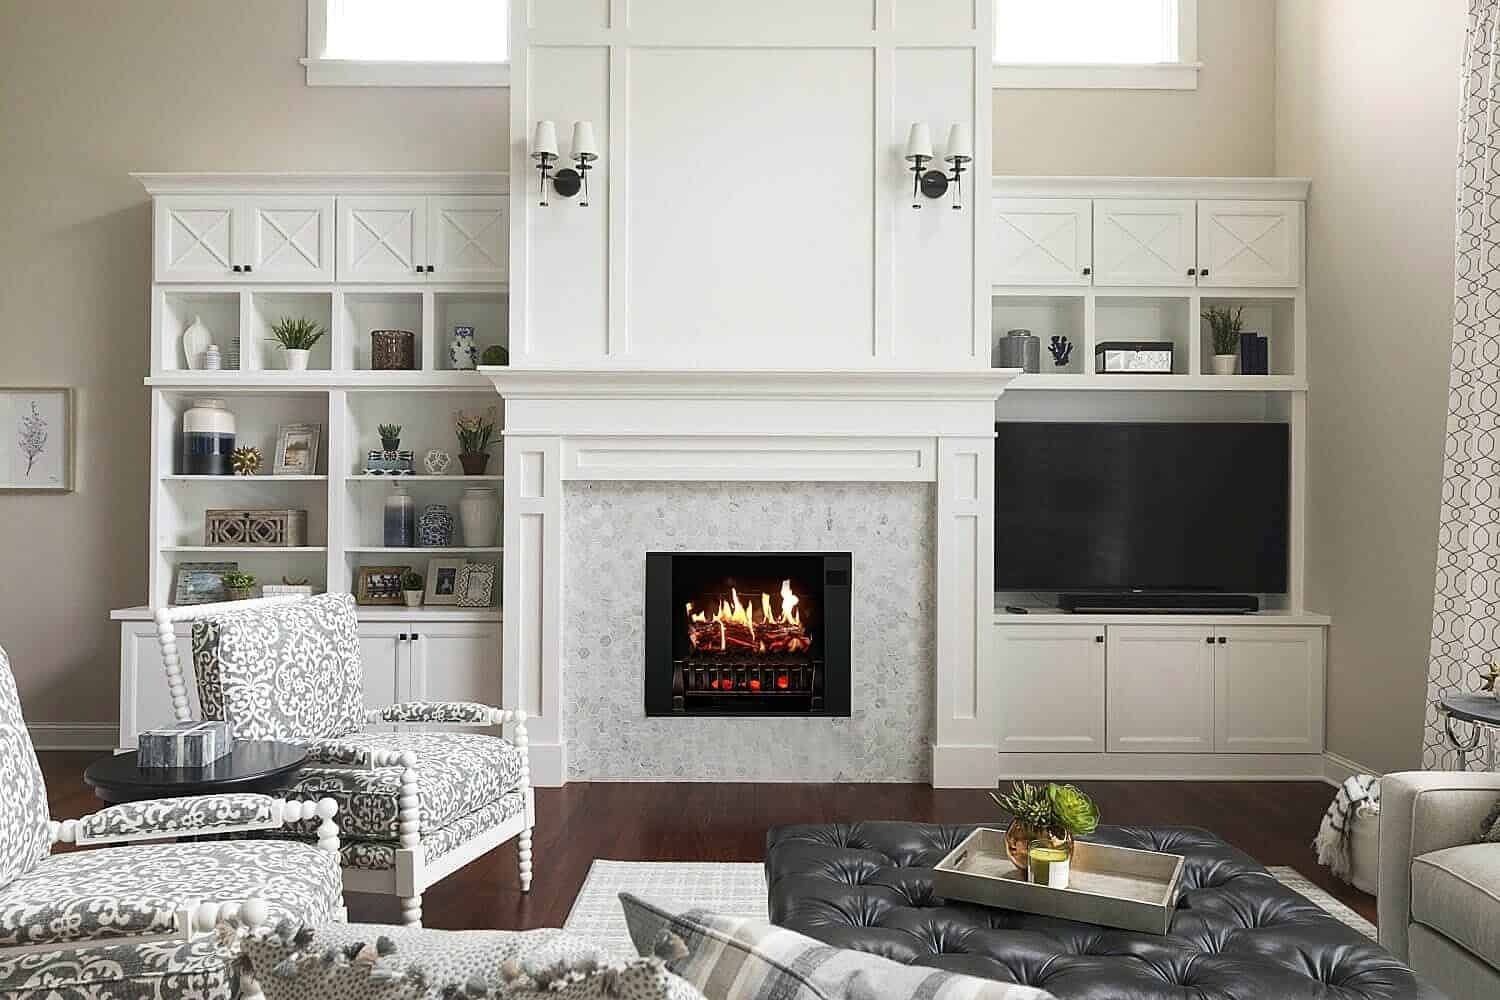 ᑕ❶ᑐ Electric Fireplace Entertainment Centers – Magikflame Blog In Electric Fireplace Entertainment Centers (View 15 of 15)